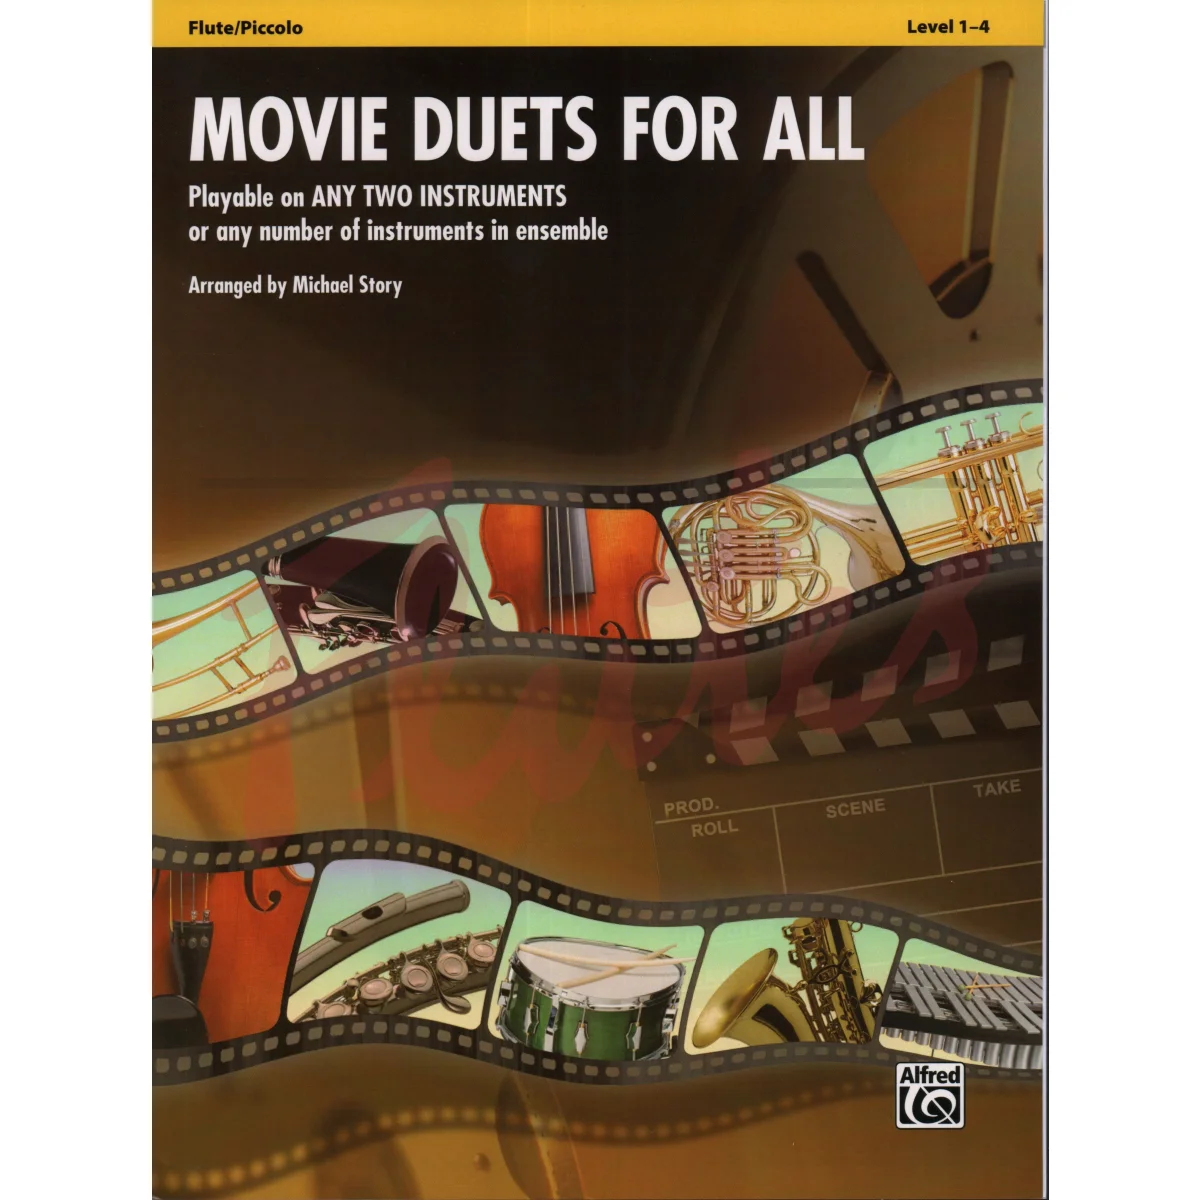 Movie Duets for All [Flute]